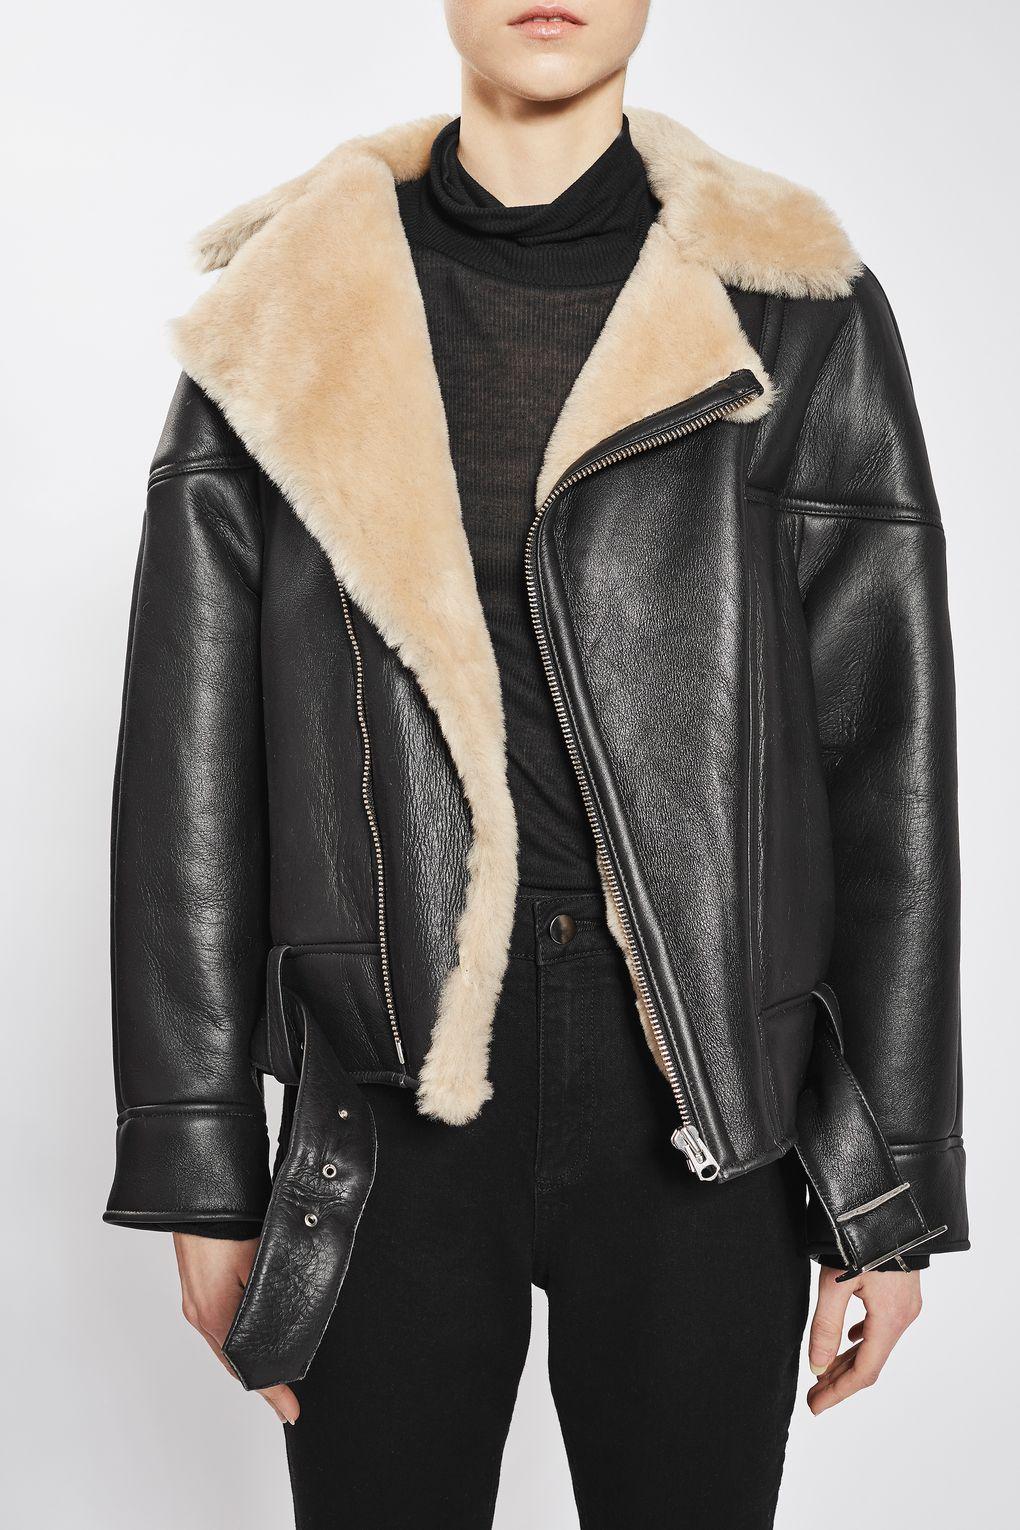 TOPSHOP Leather Shearling Aviator Jacket By Boutique in Chocolate ...